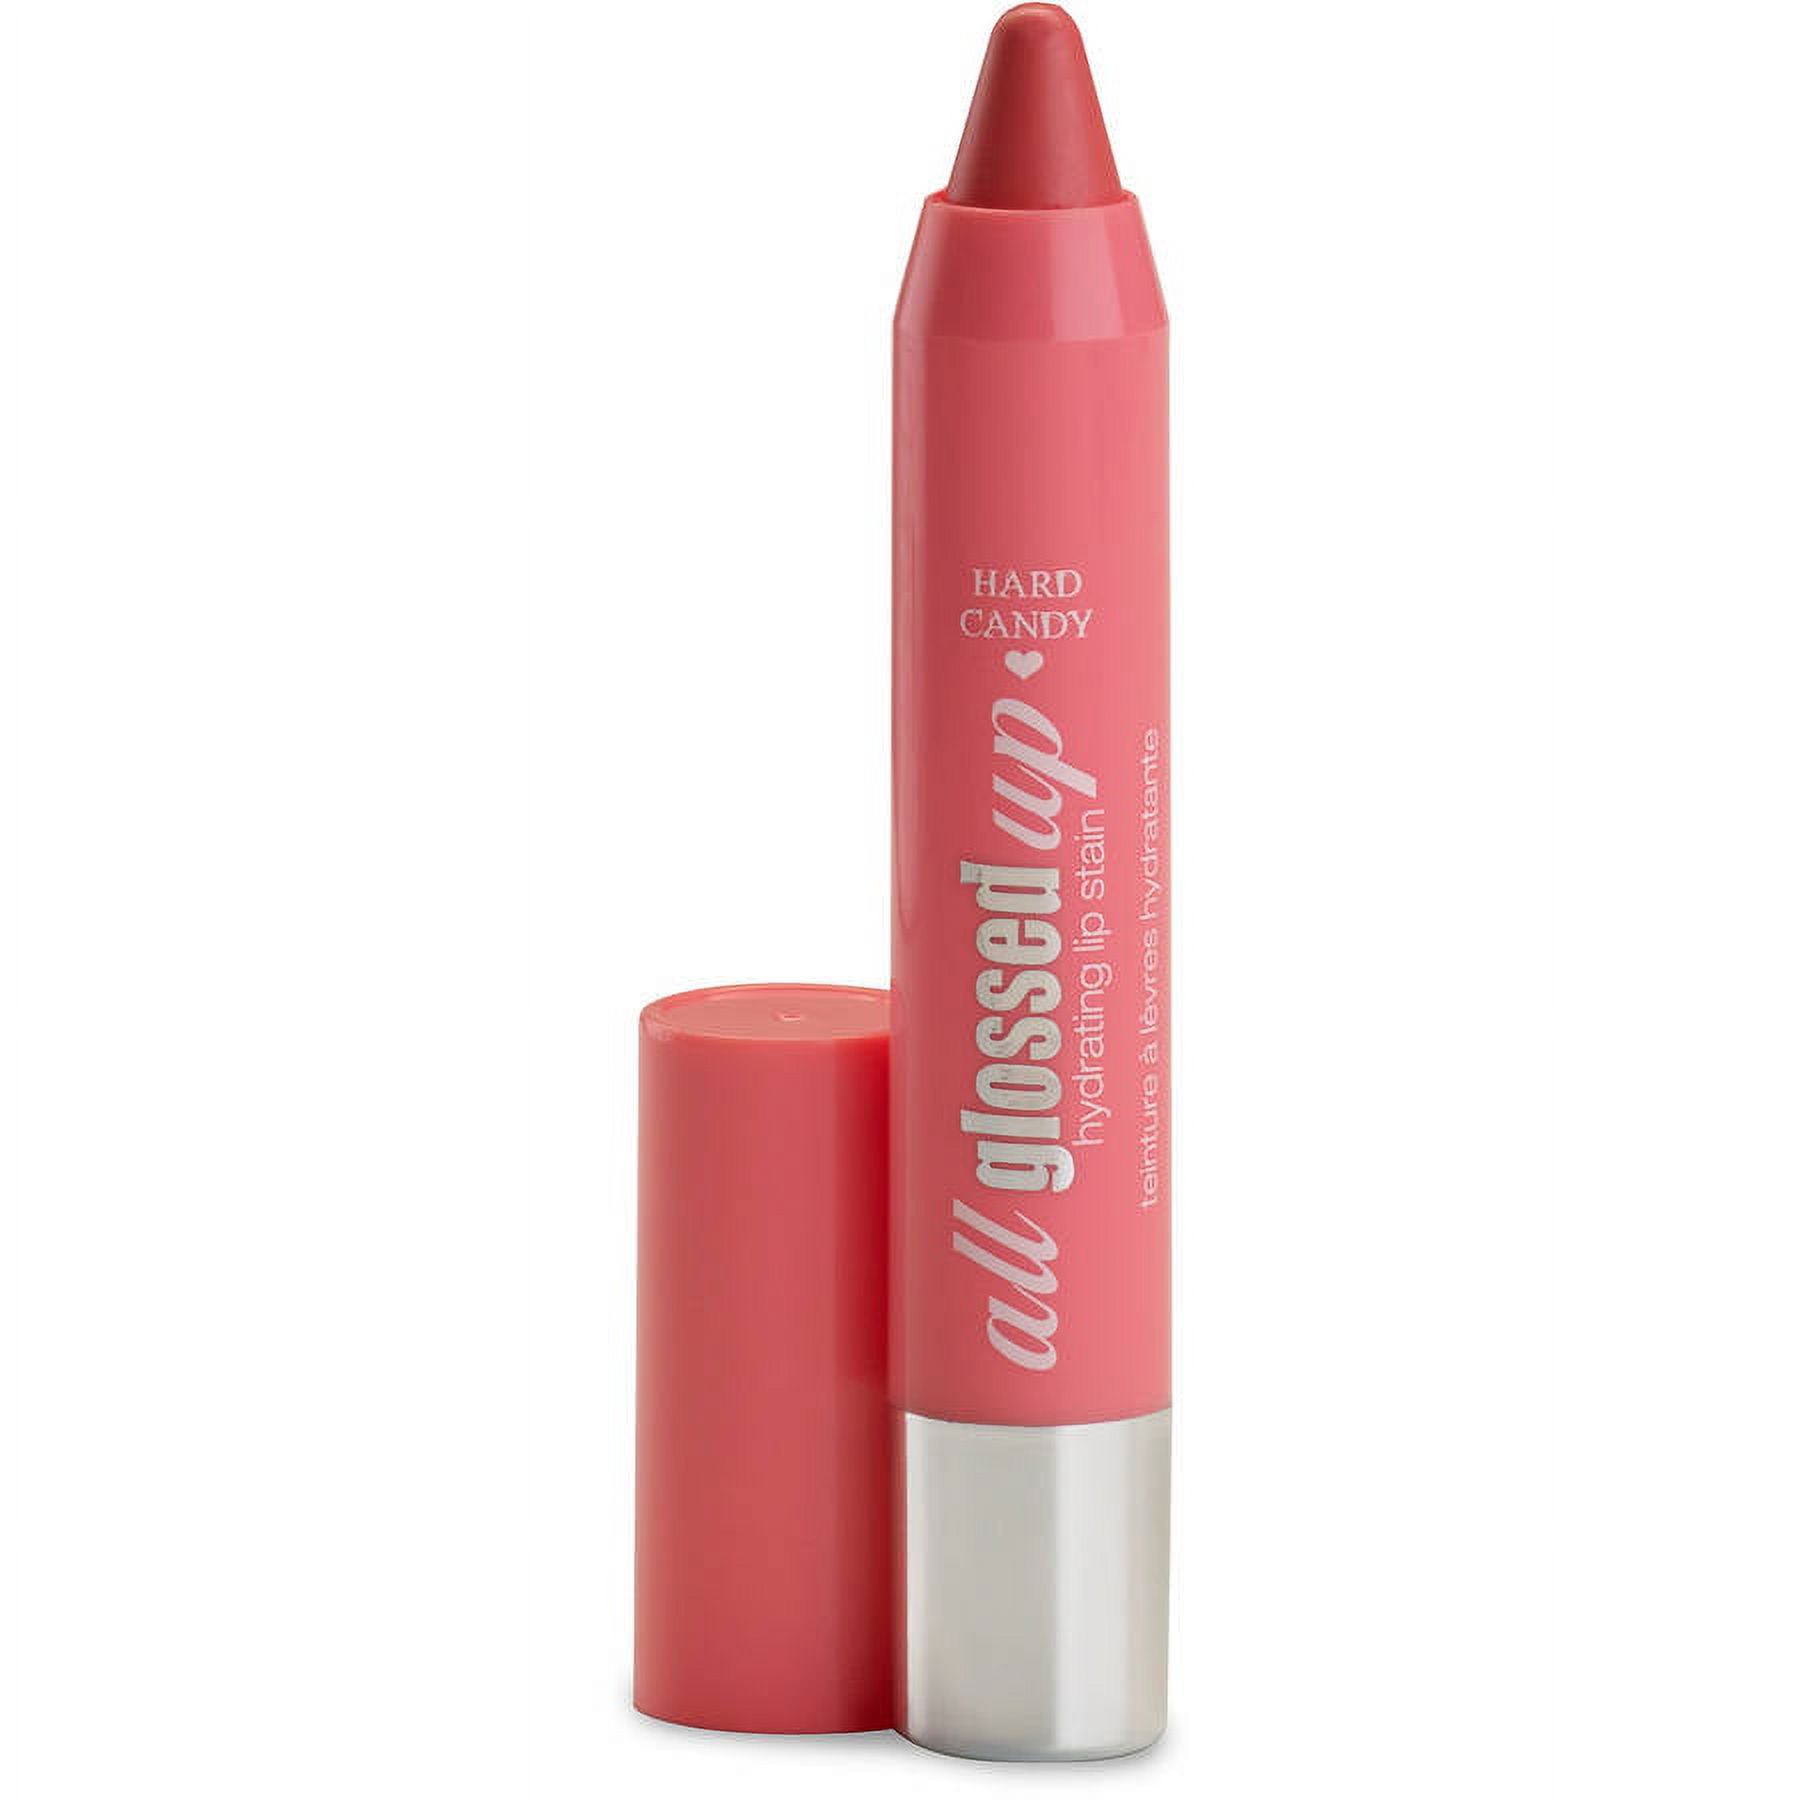 Hard Candy All Glossed Up Hydrating Lip Stain, Cupcake - image 1 of 1